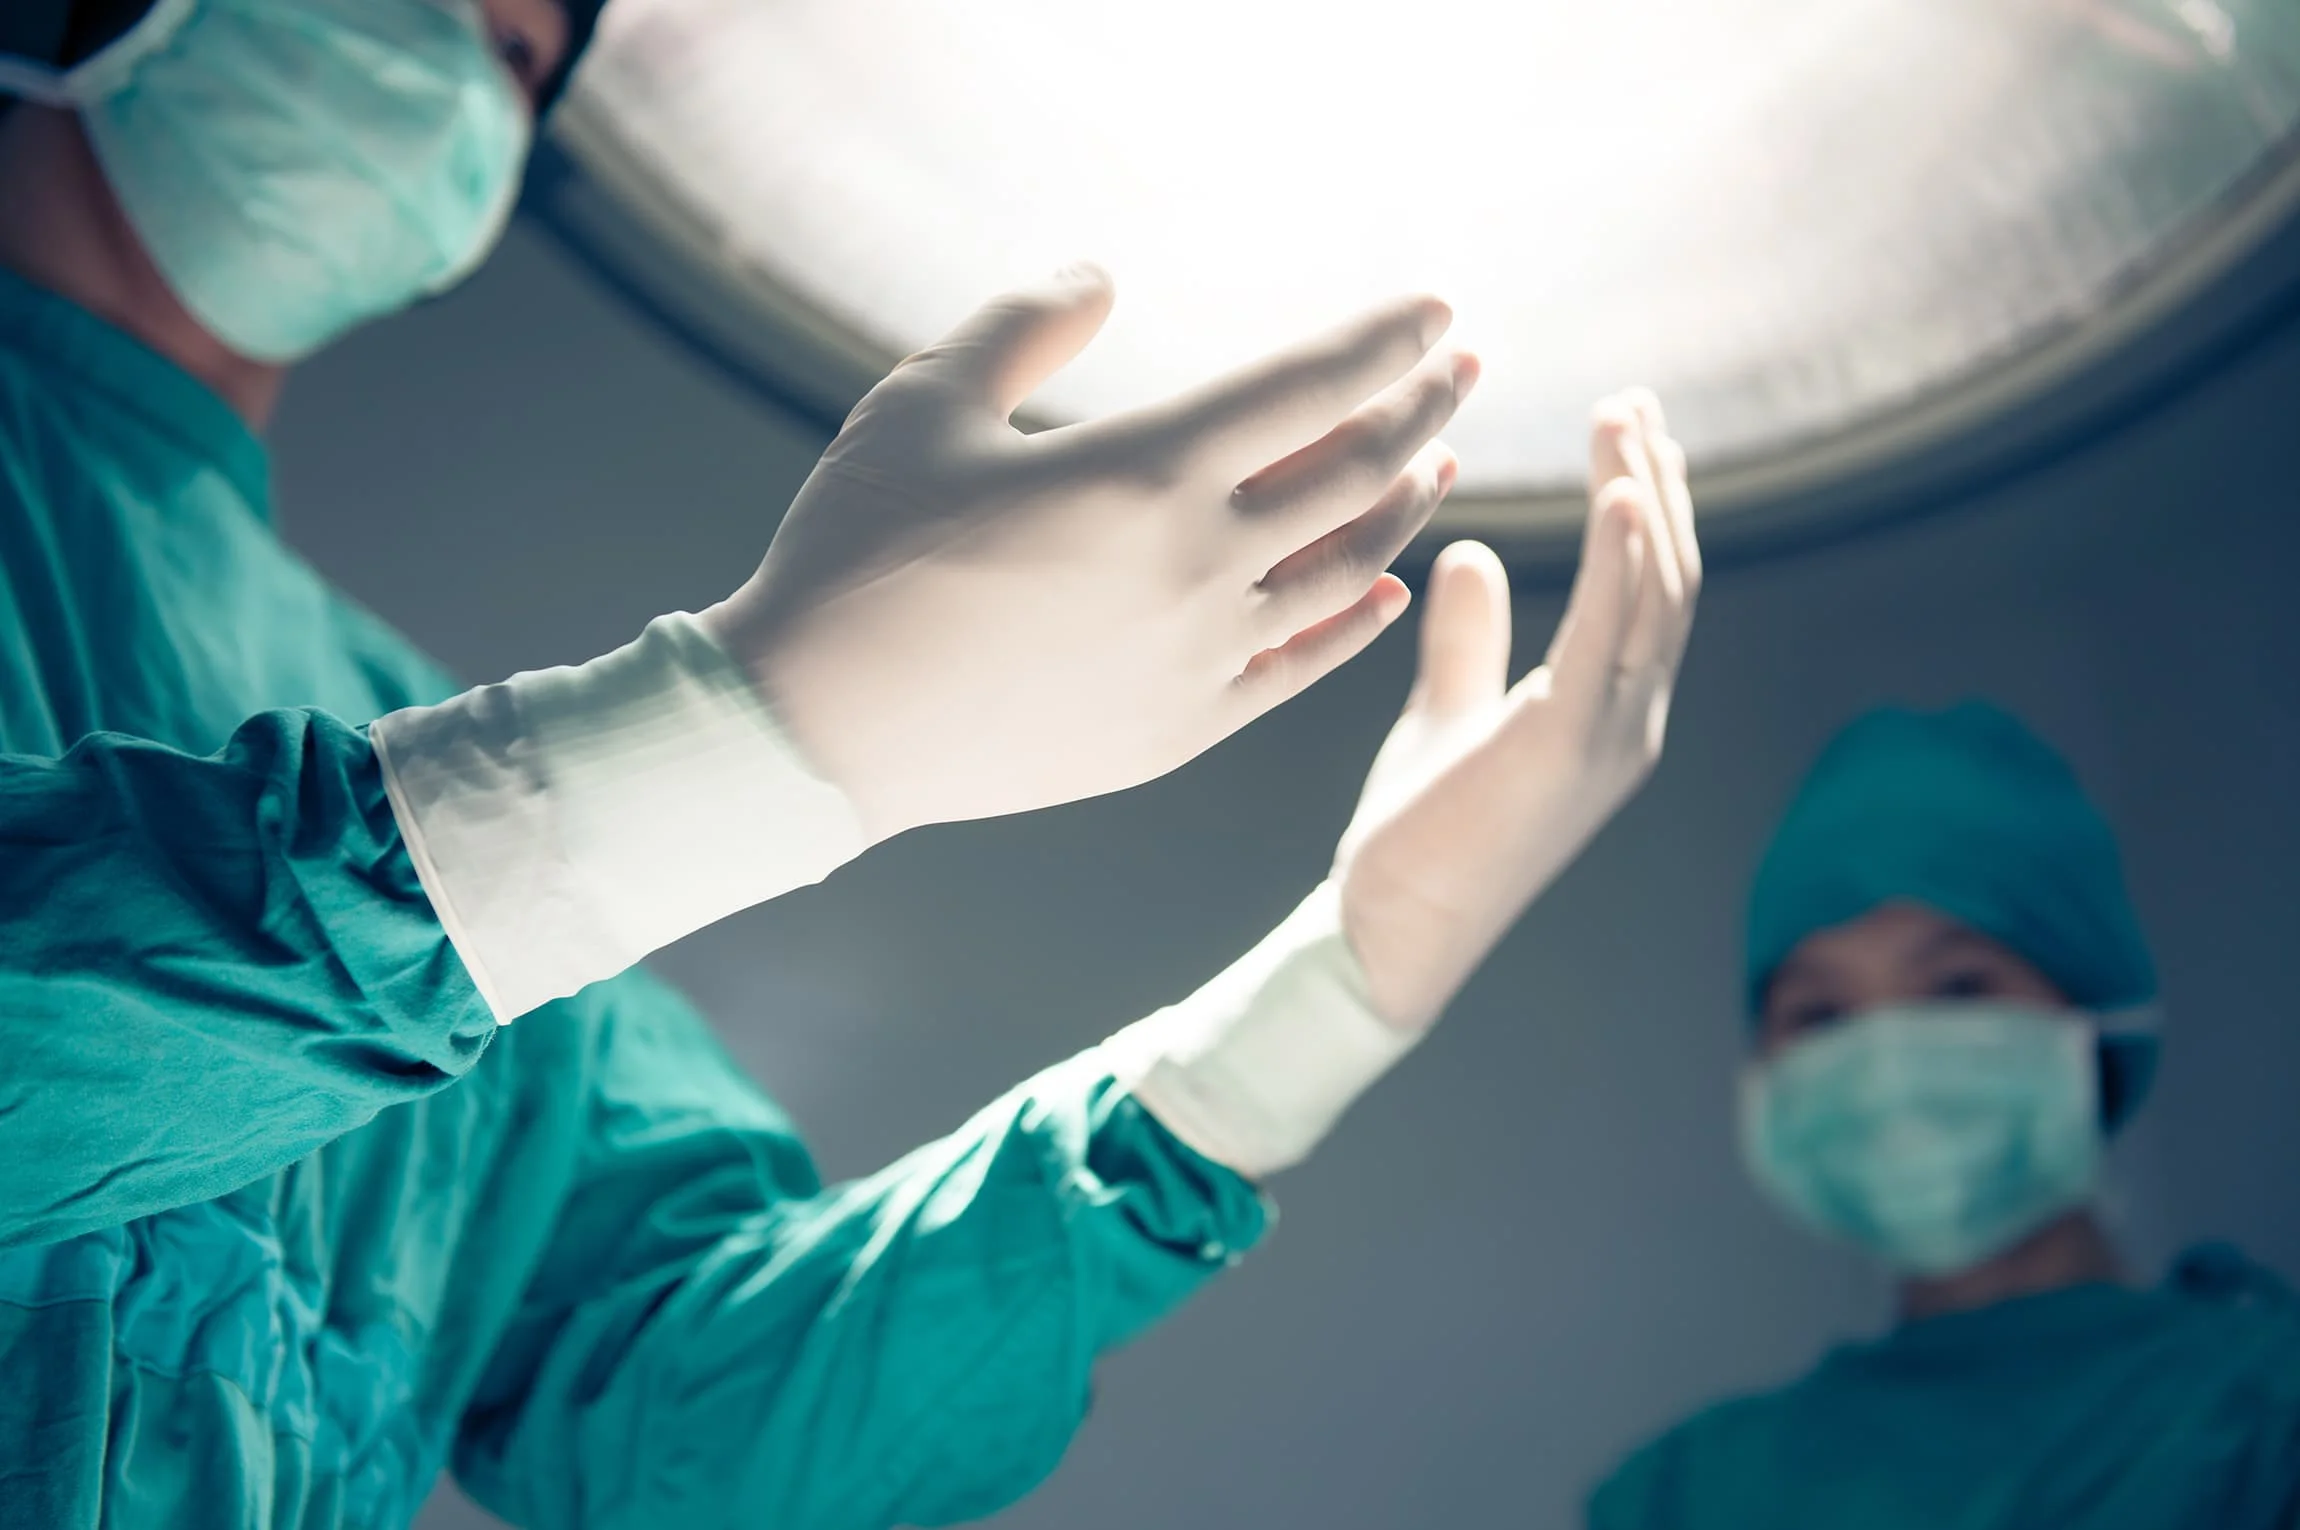 Providing a wide range of gloves optimized for multiple medical applications